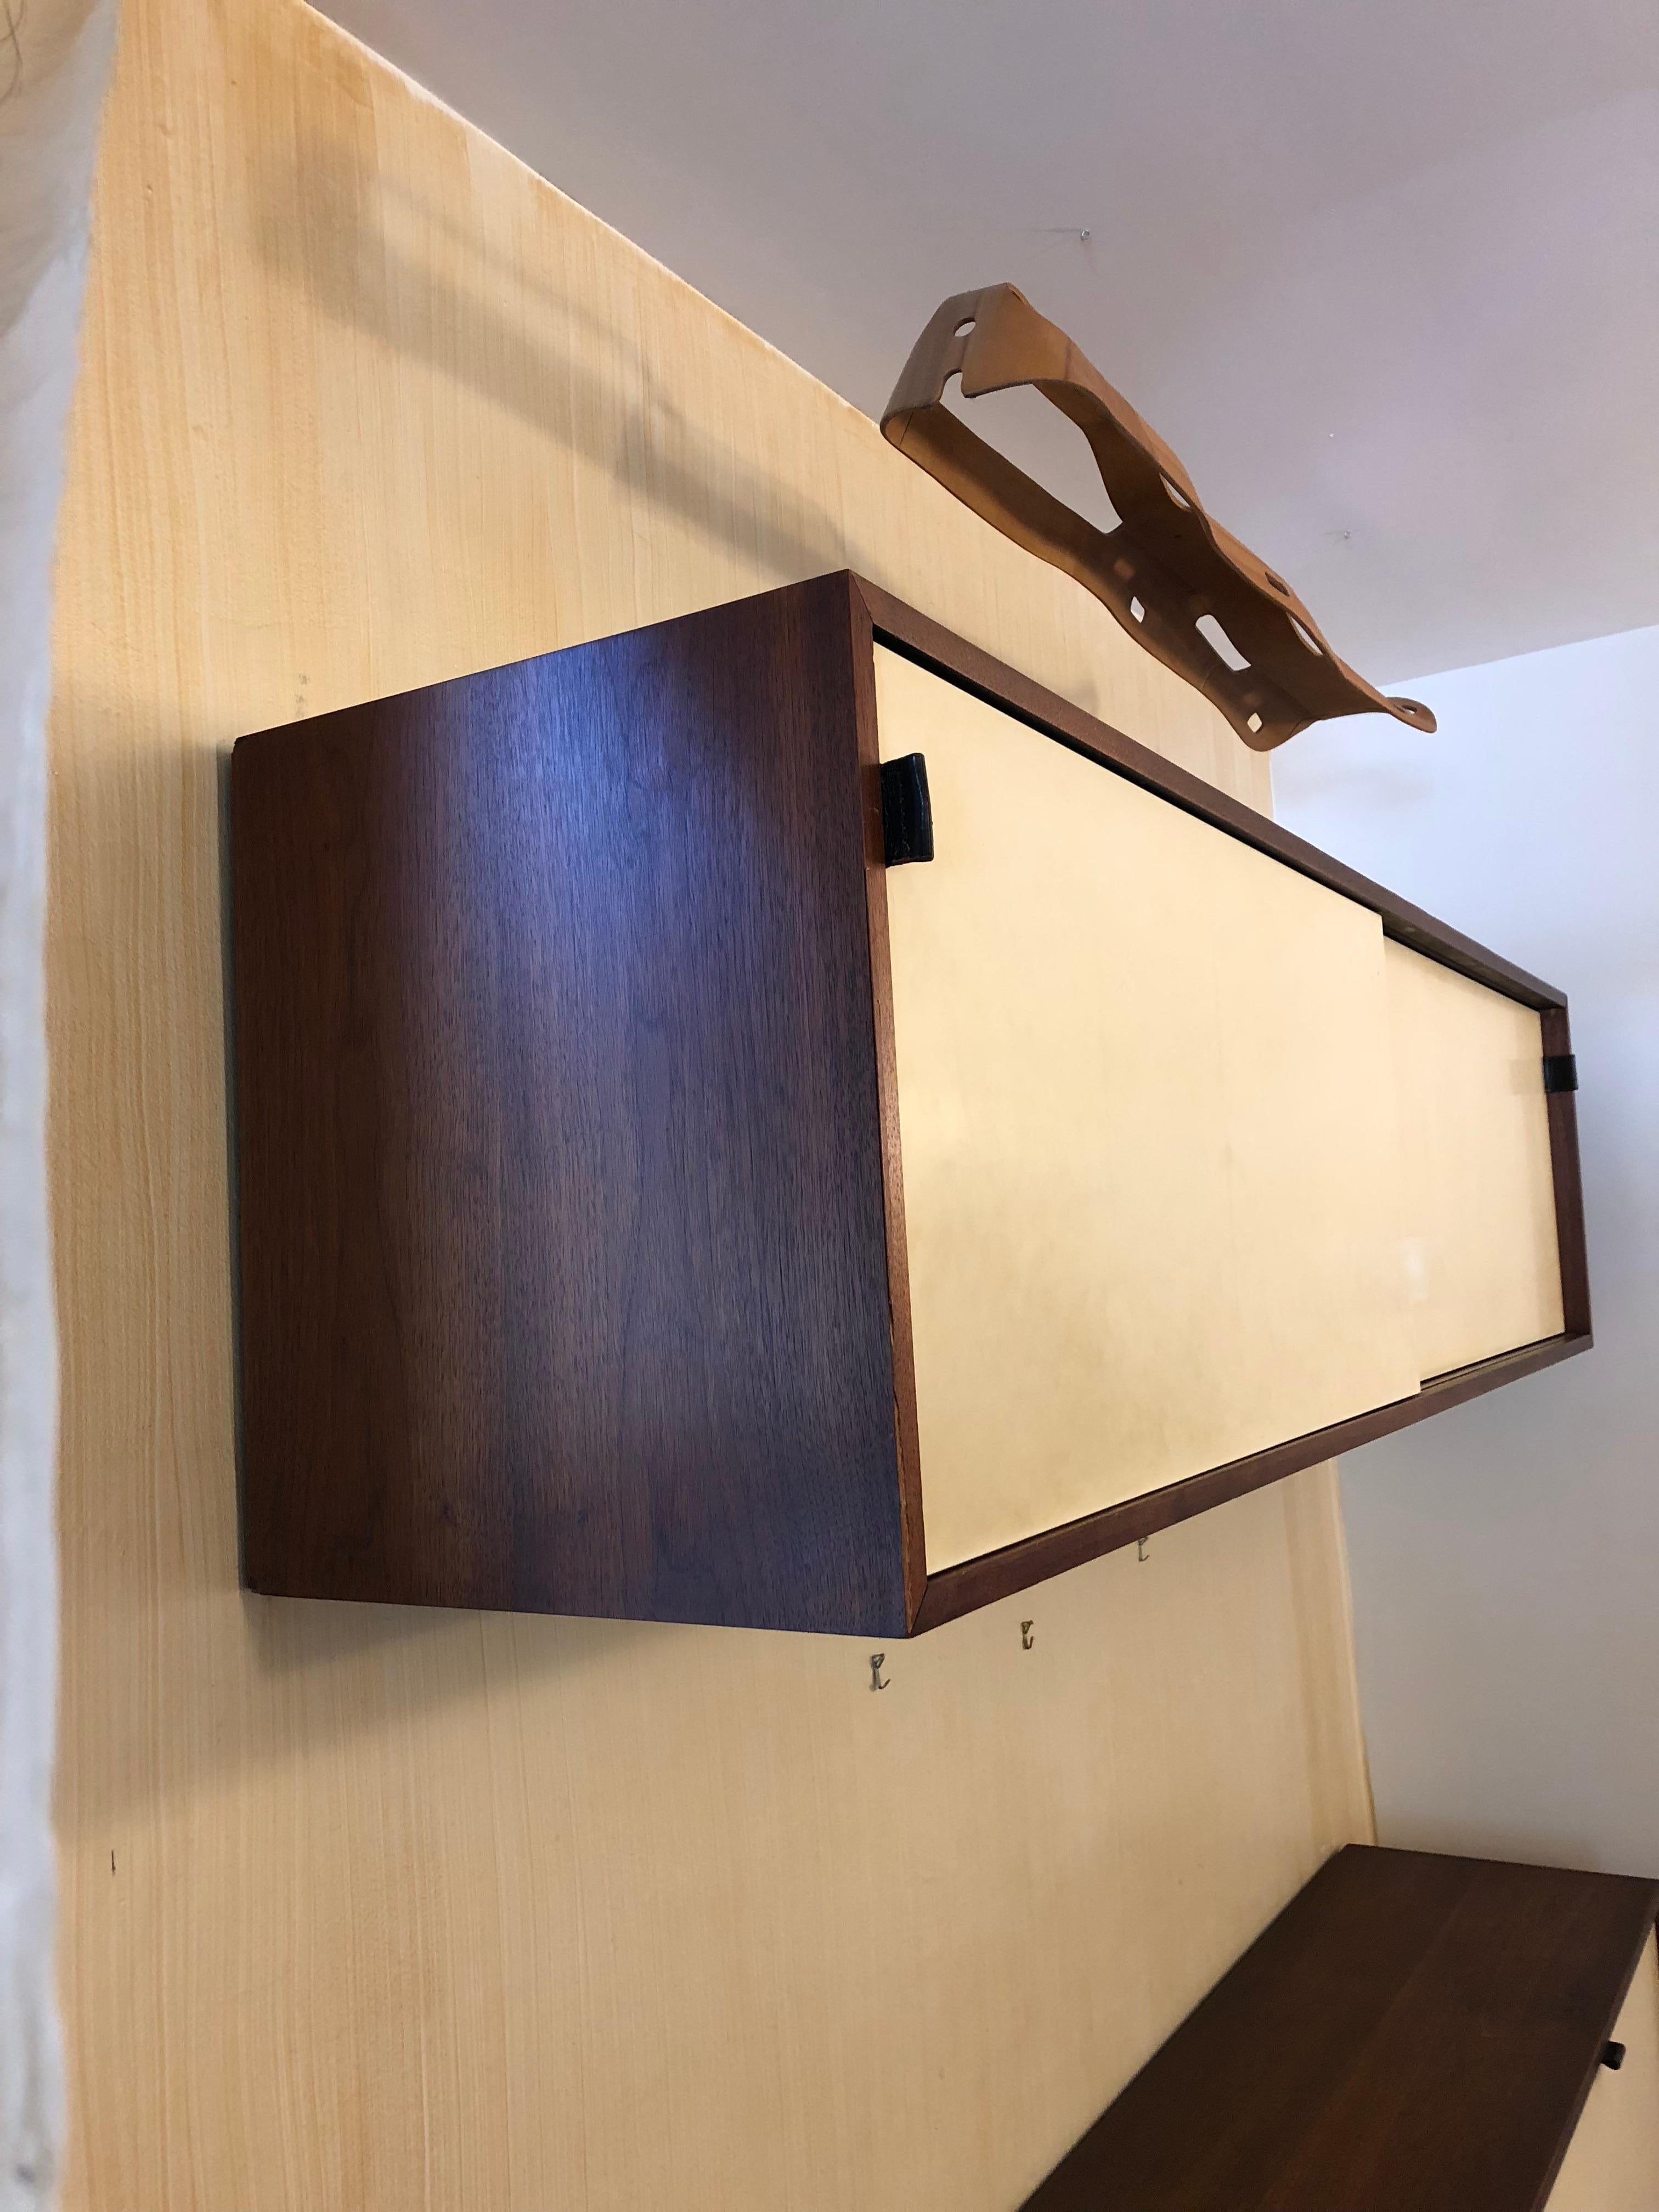 Classic walnut and lacquer sliding door credenza by Florence Knoll. Original leather pulls.